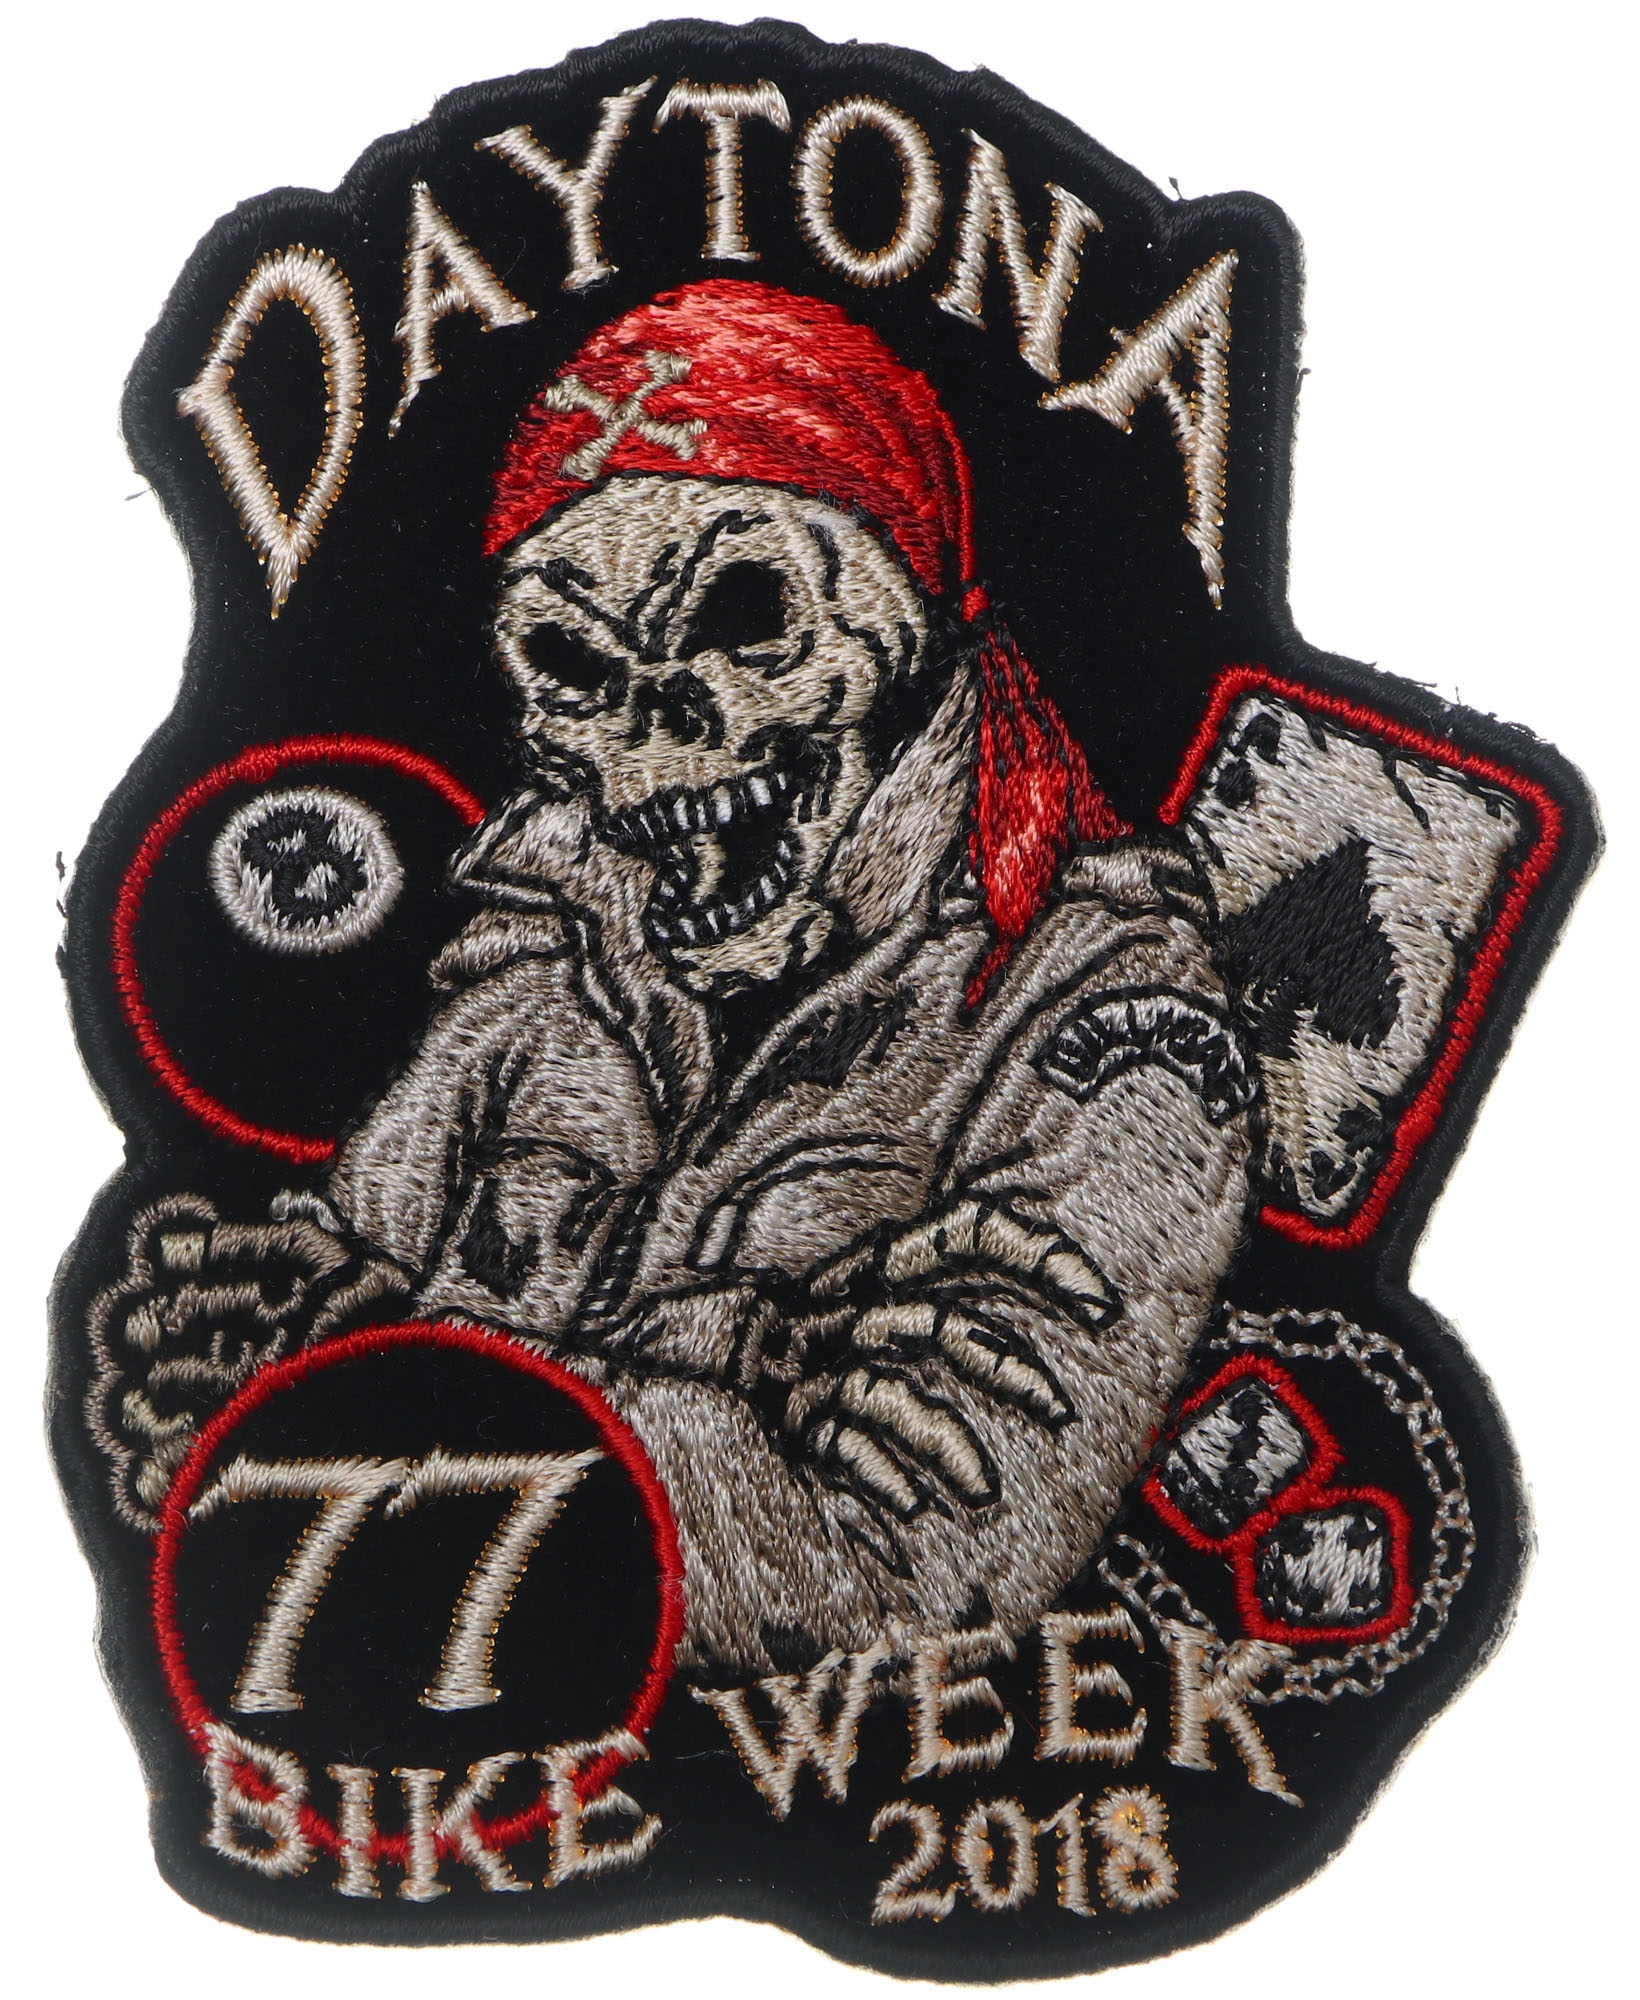 Daytona 2018 Bike Week Patches are Available for Sale